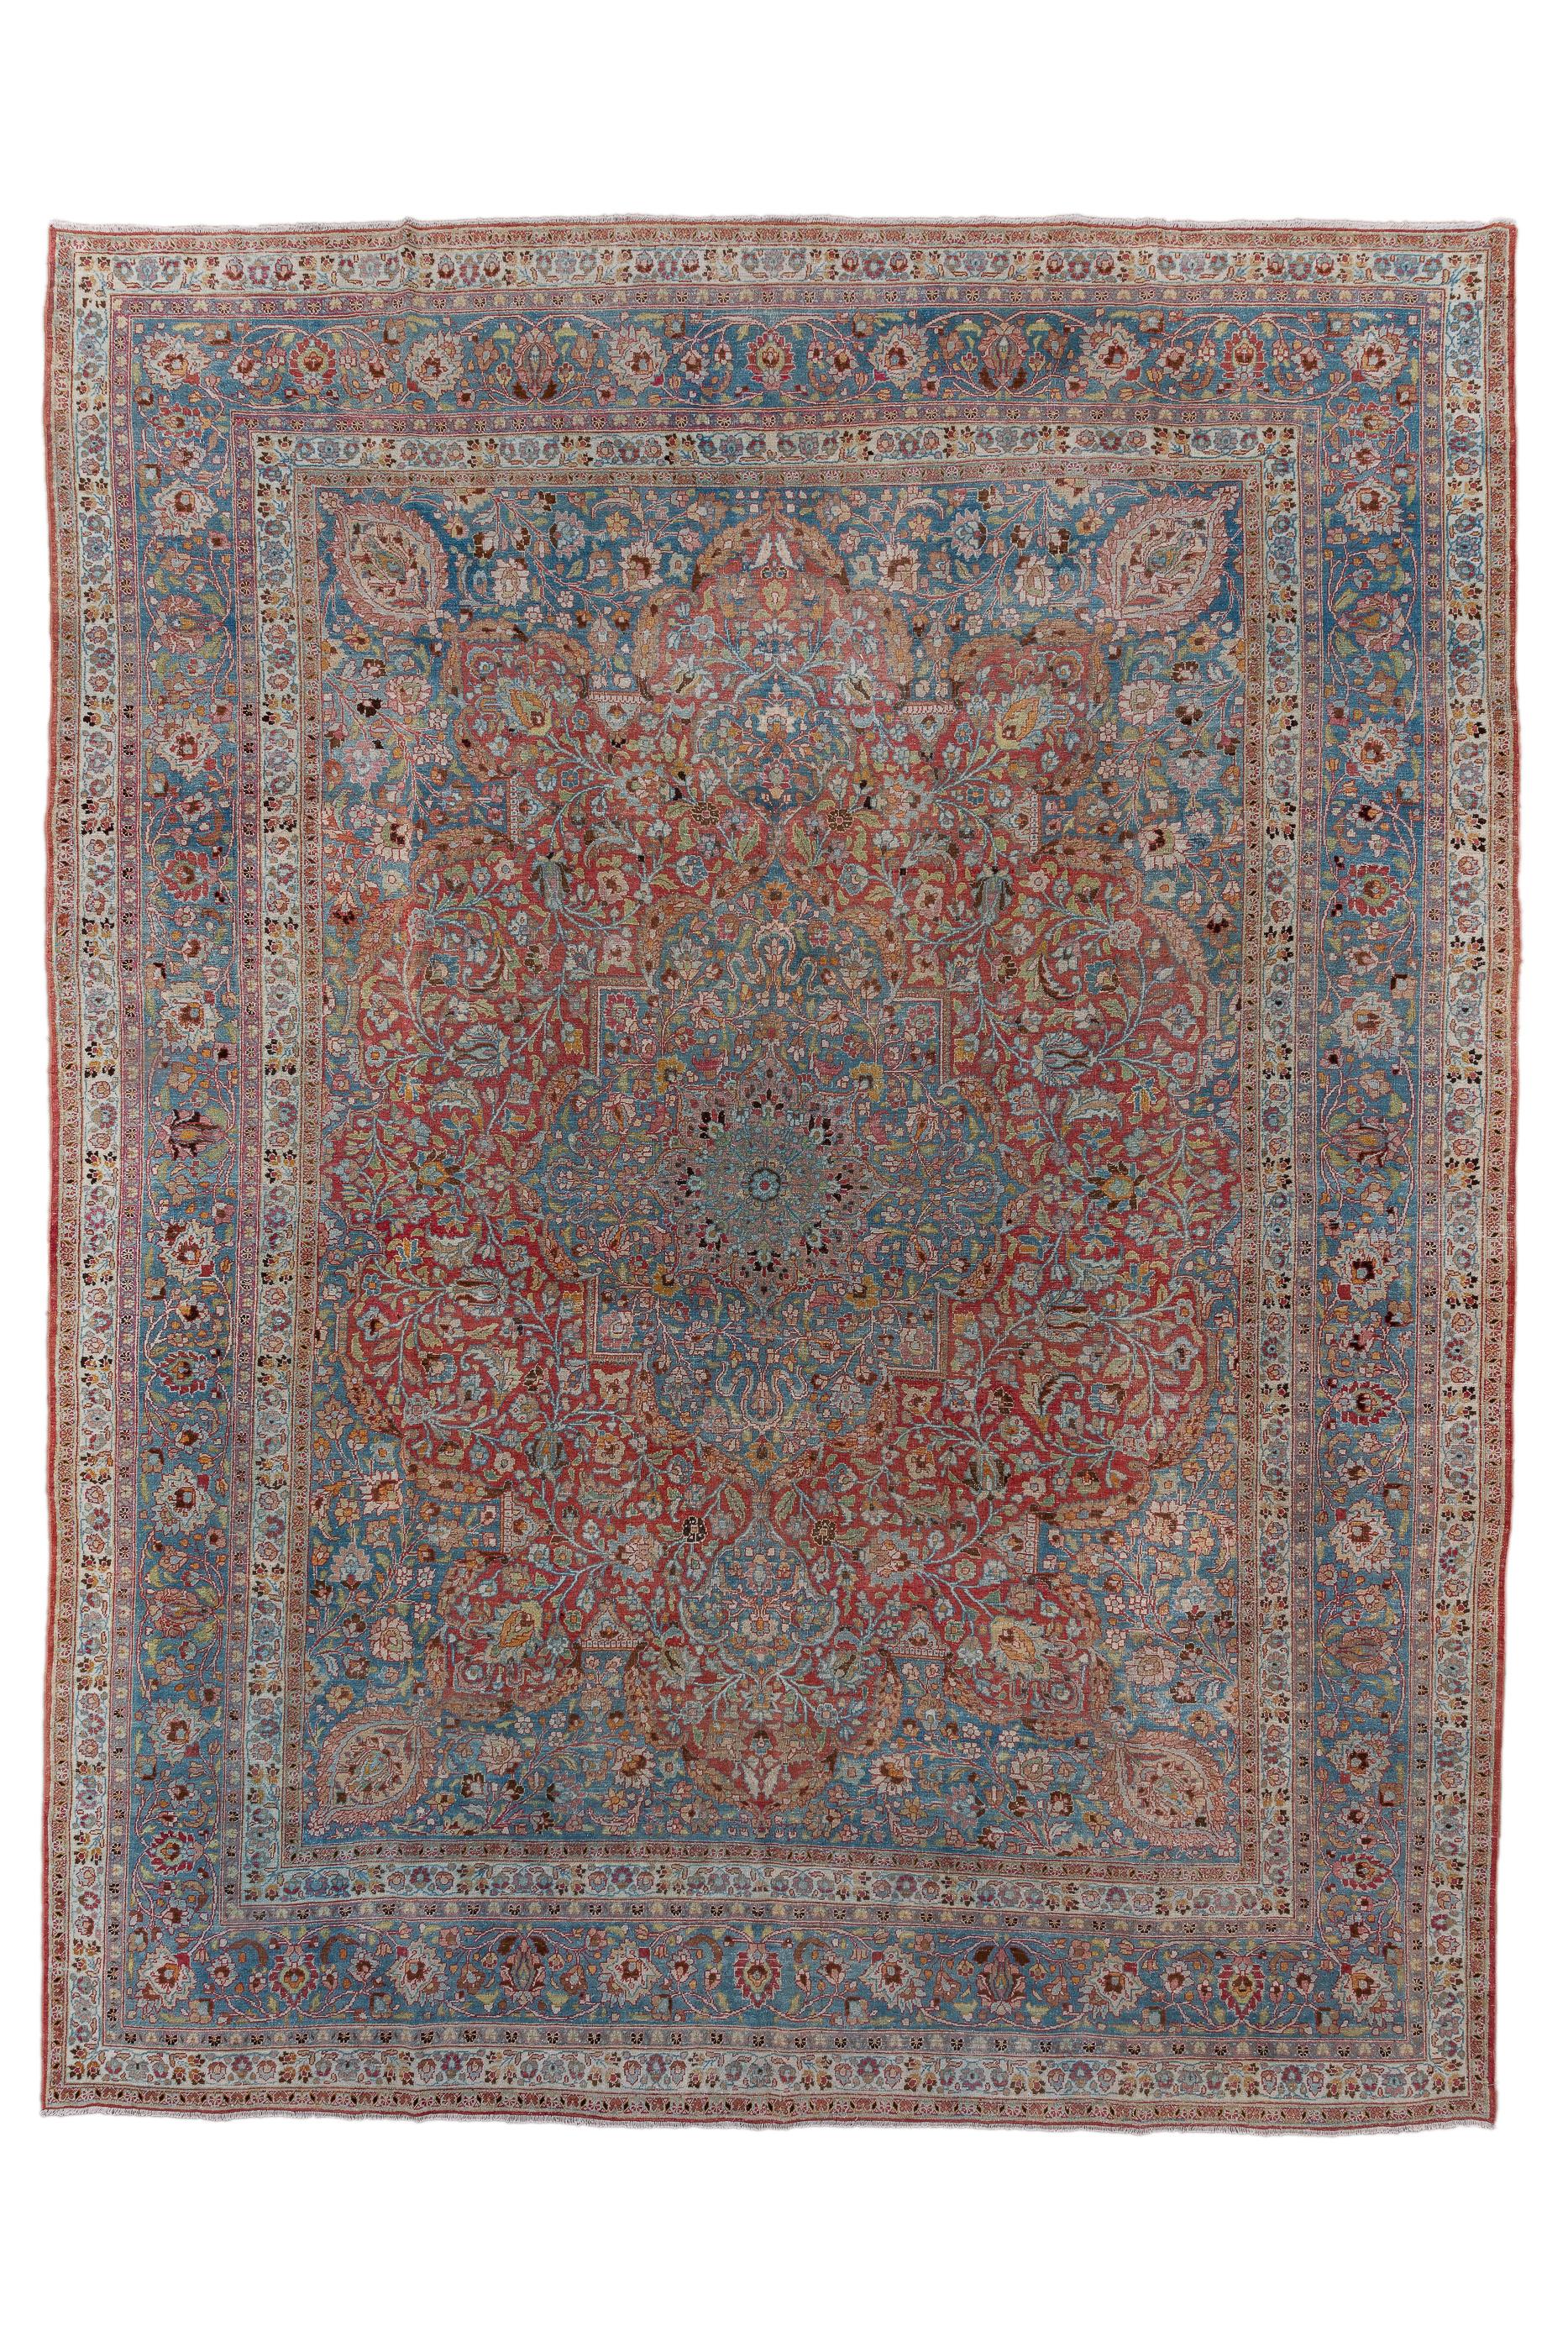 This finely woven city carpet shows the classic Kashan red field, centred by  a blue-green millefleurs medallion with escutcheon pendants, set within en suite blue-green extended corners, all sections with varying millefleurs designs. Oval palmettes